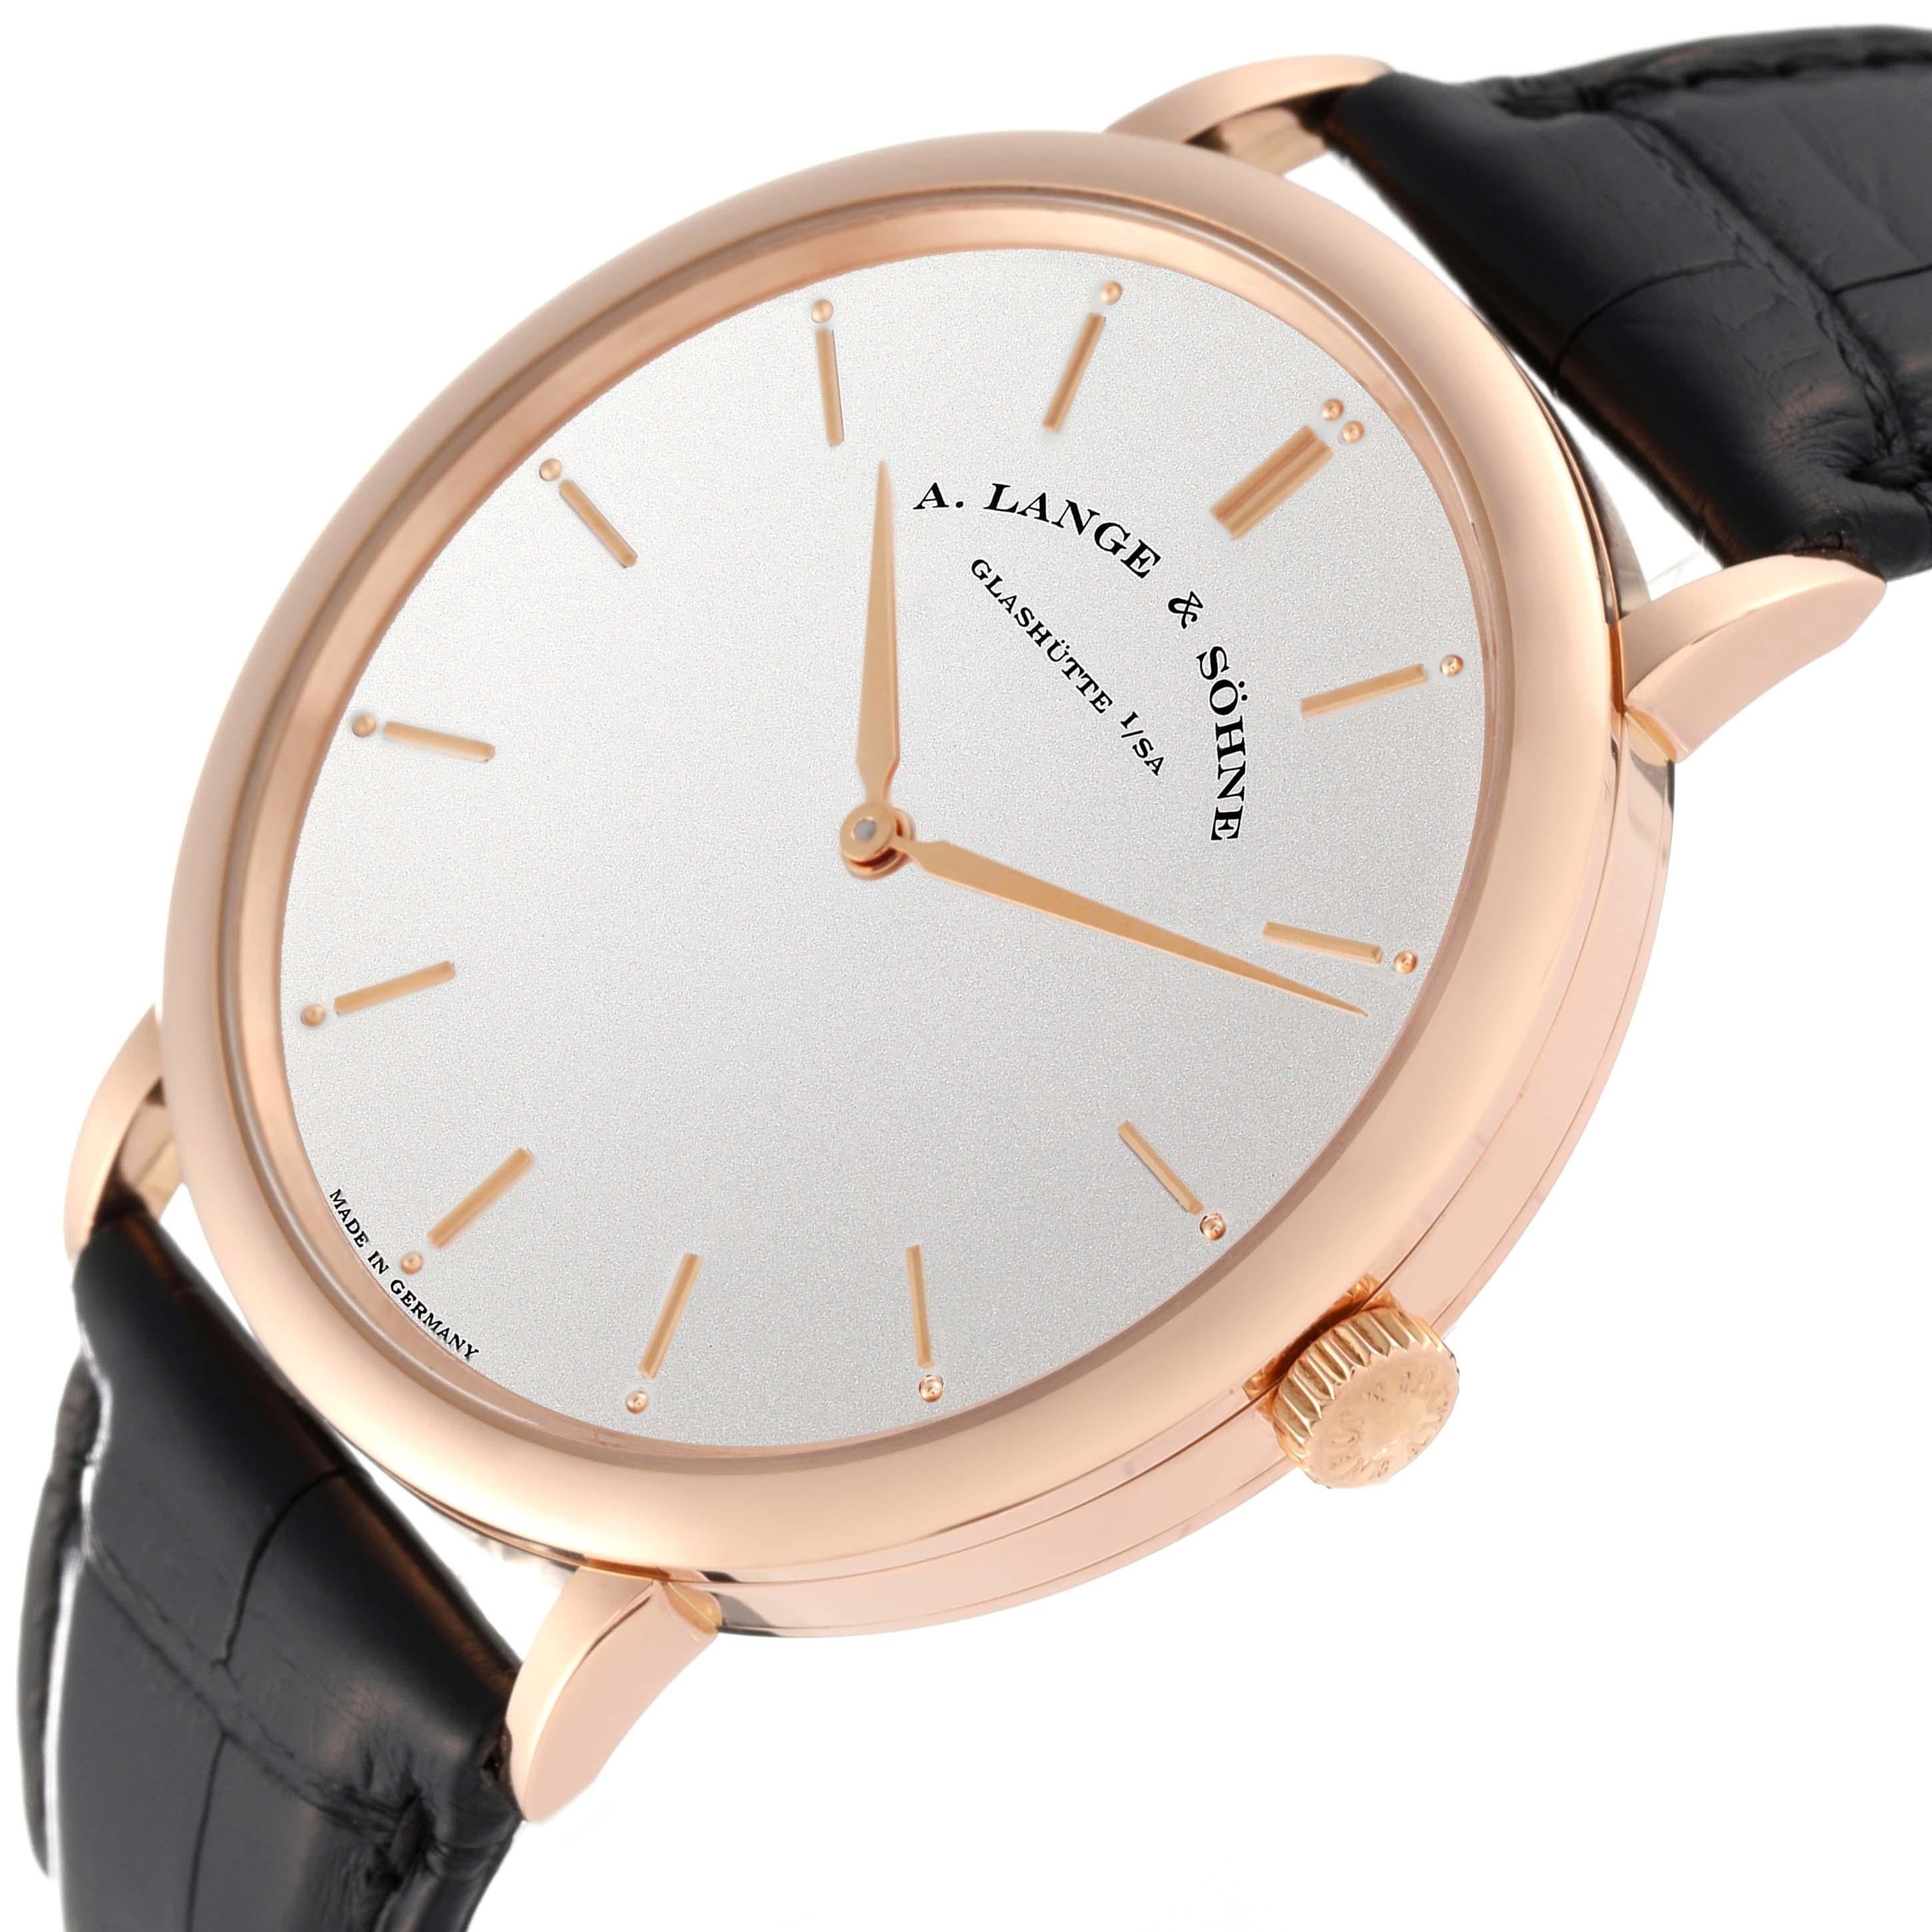 A. Lange and Sohne Saxonia Thin 40mm Rose Gold Mens Watch 211.032 Pour hommes en vente